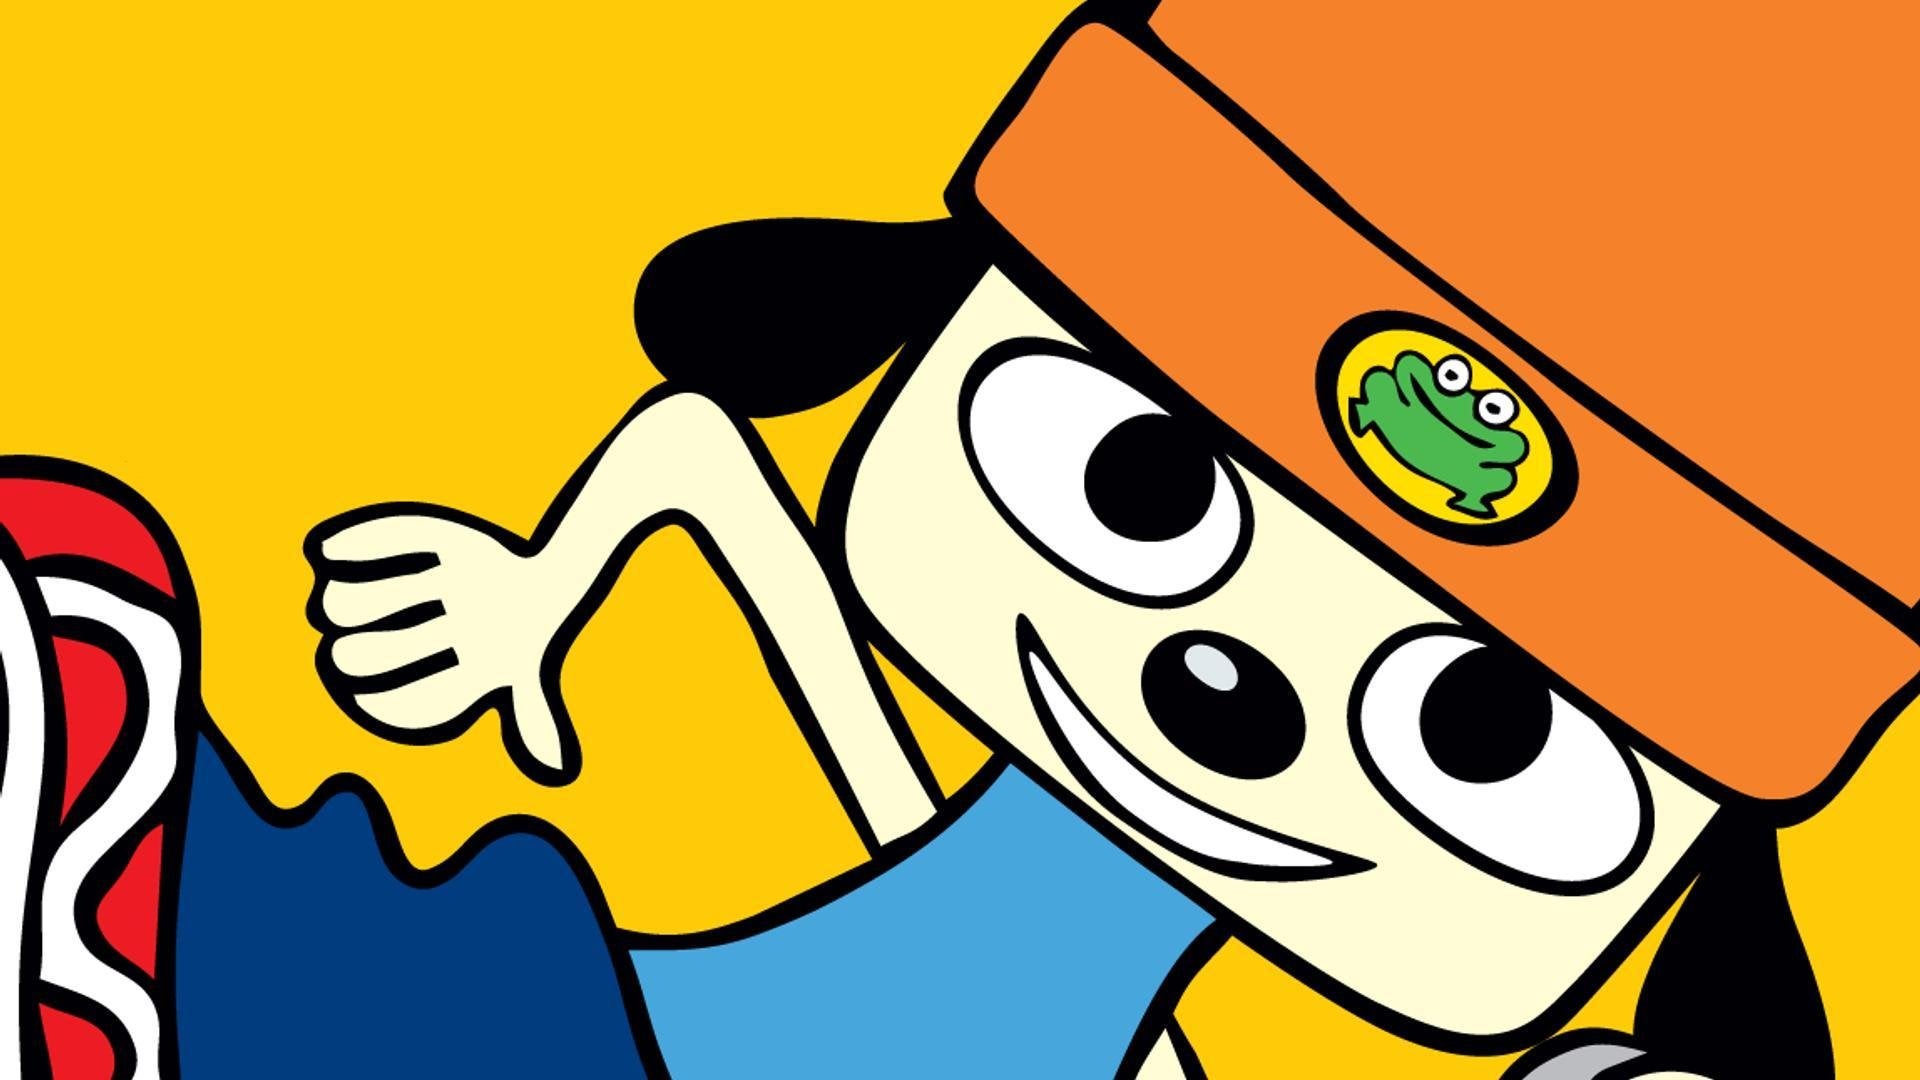 Image for PaRappa the Rapper is getting remastered for PS4 to mark its 20th anniversary